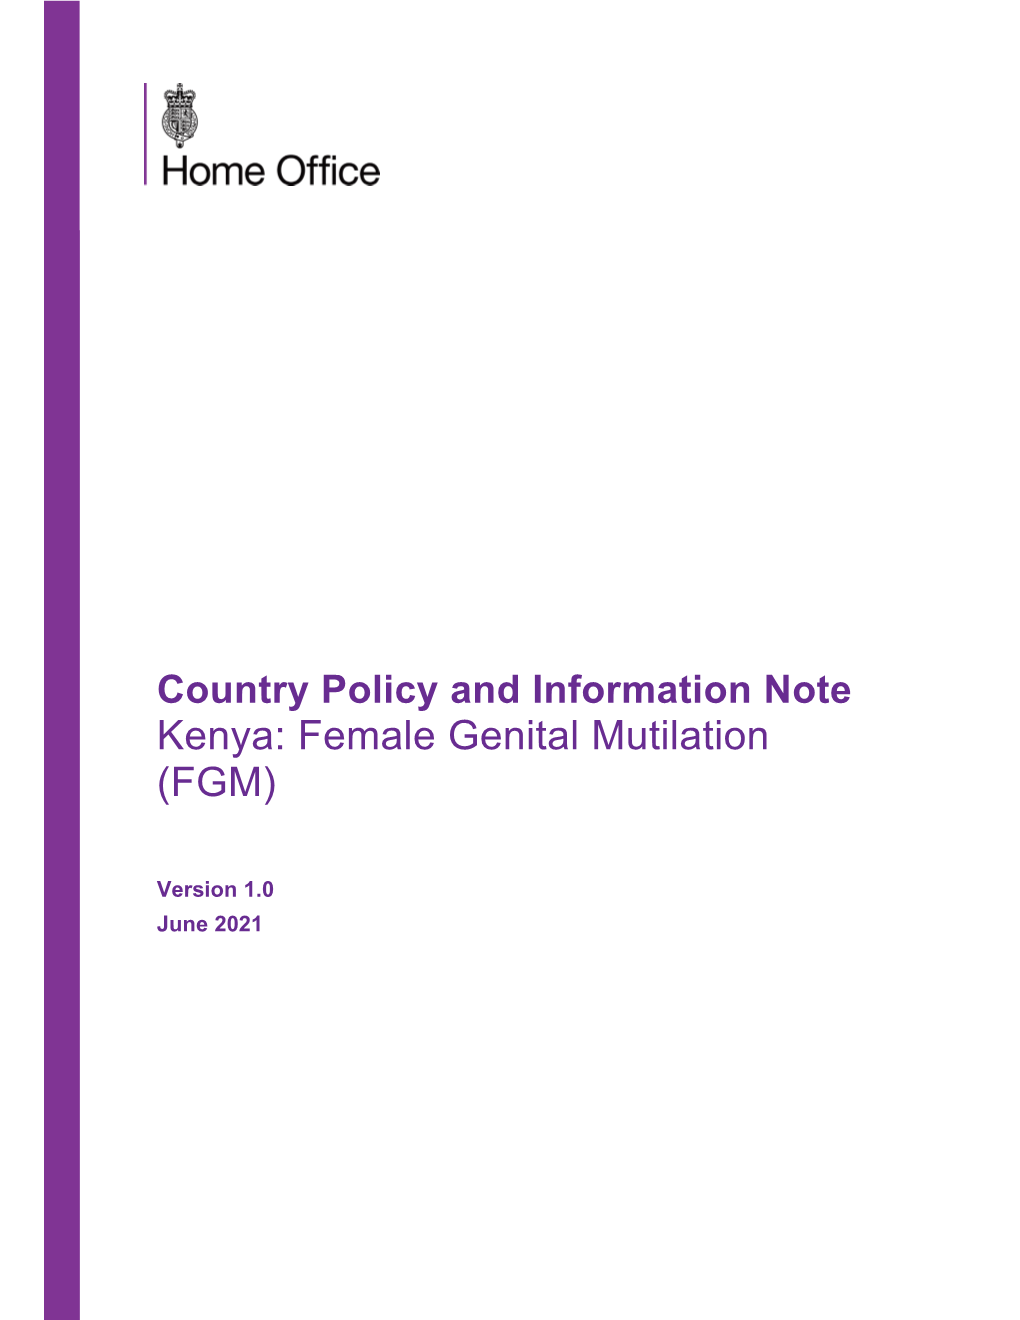 Country Policy and Information Note Kenya: Female Genital Mutilation (FGM)